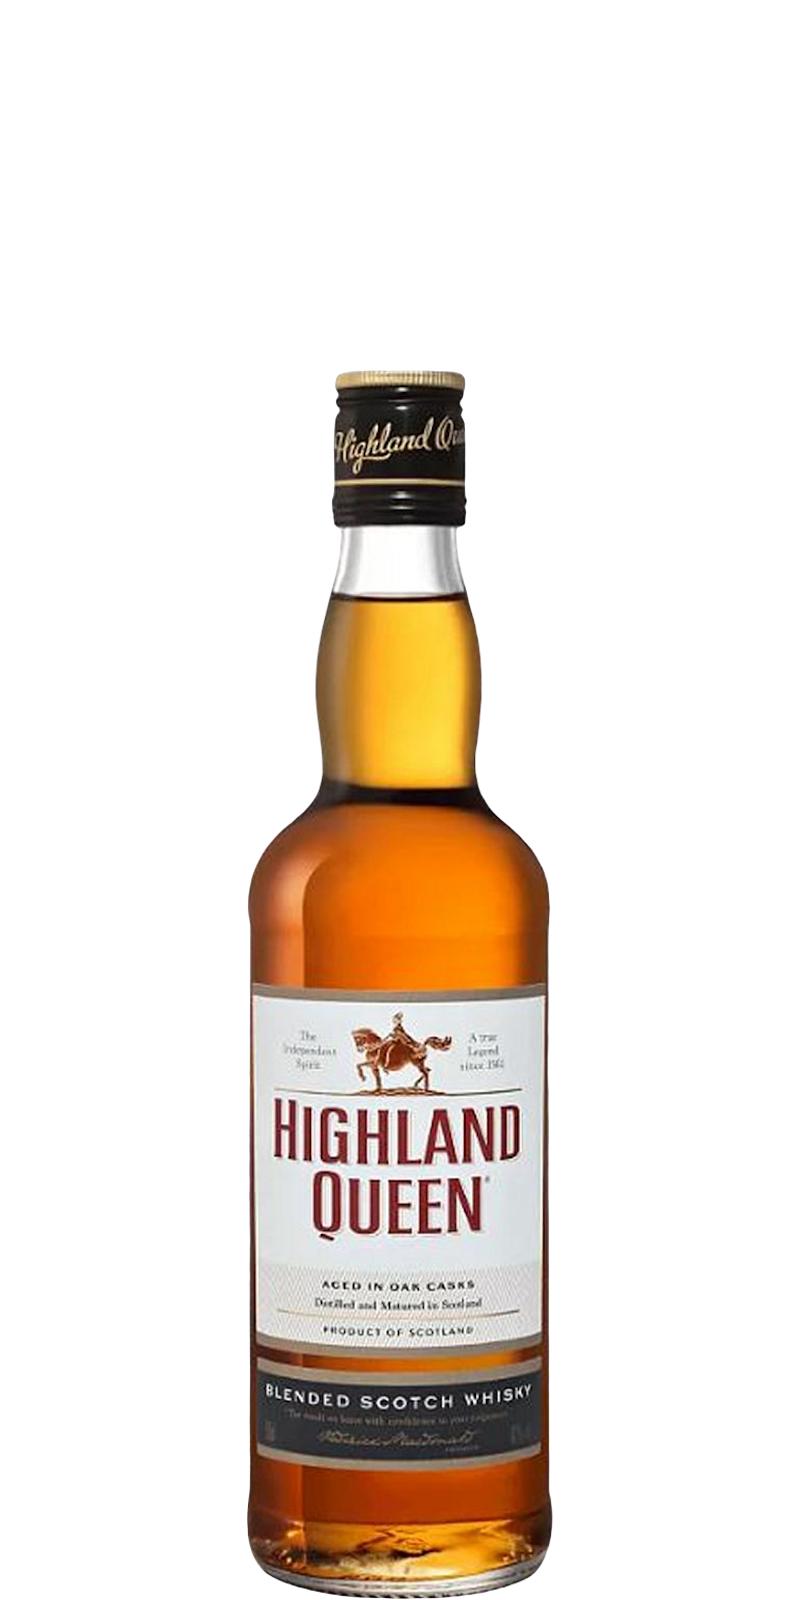 Highland Queen Blended Scotch Whisky HQSW